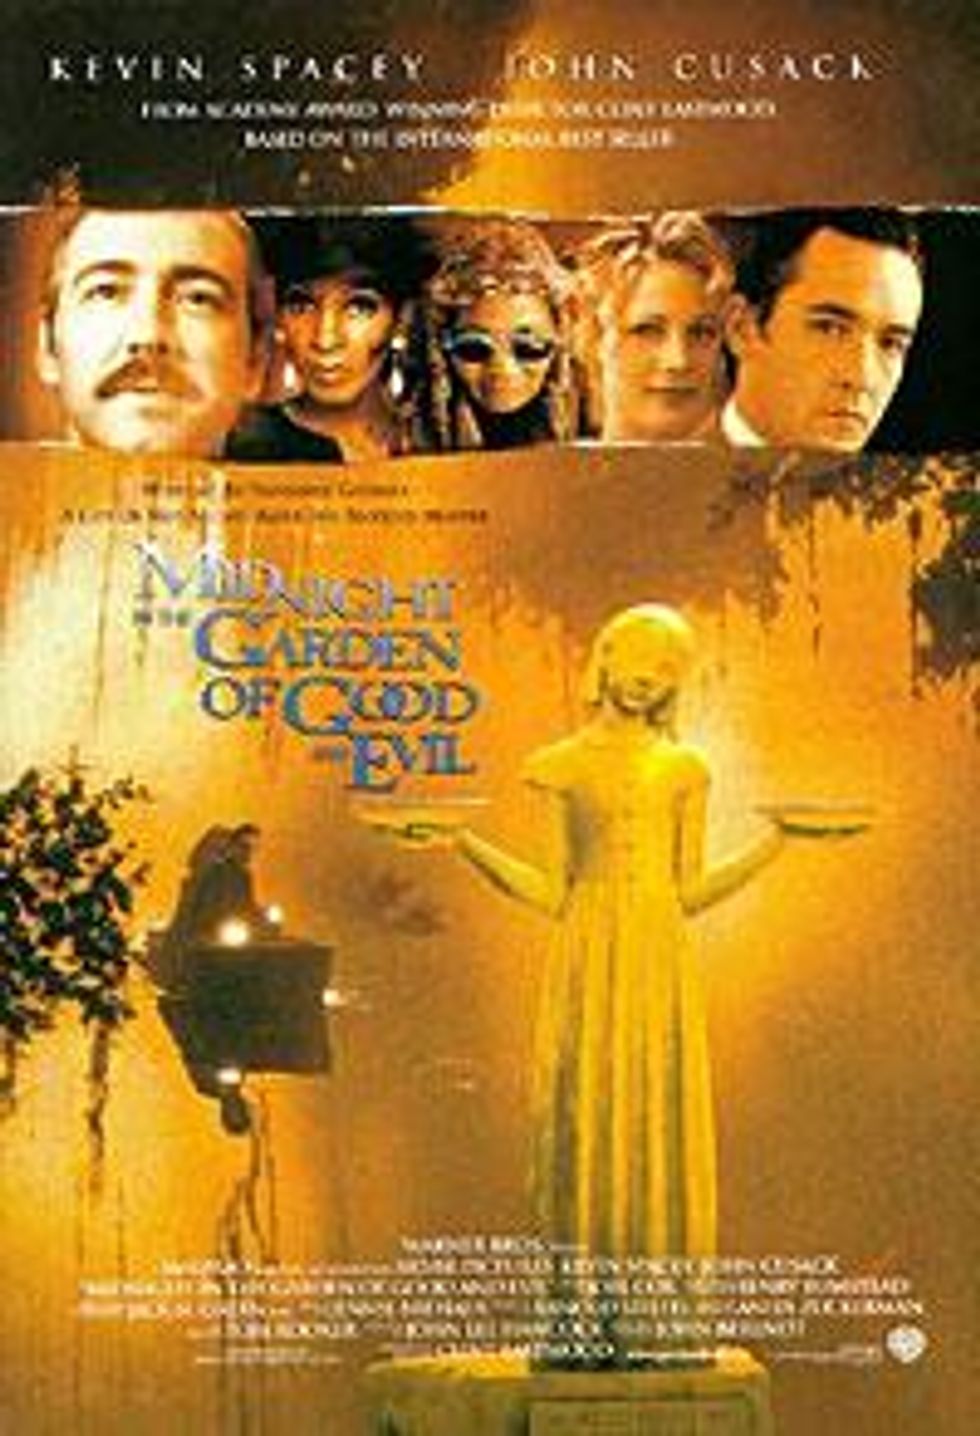 Midnight_in_the_garden_of_good_and_evilx200_0